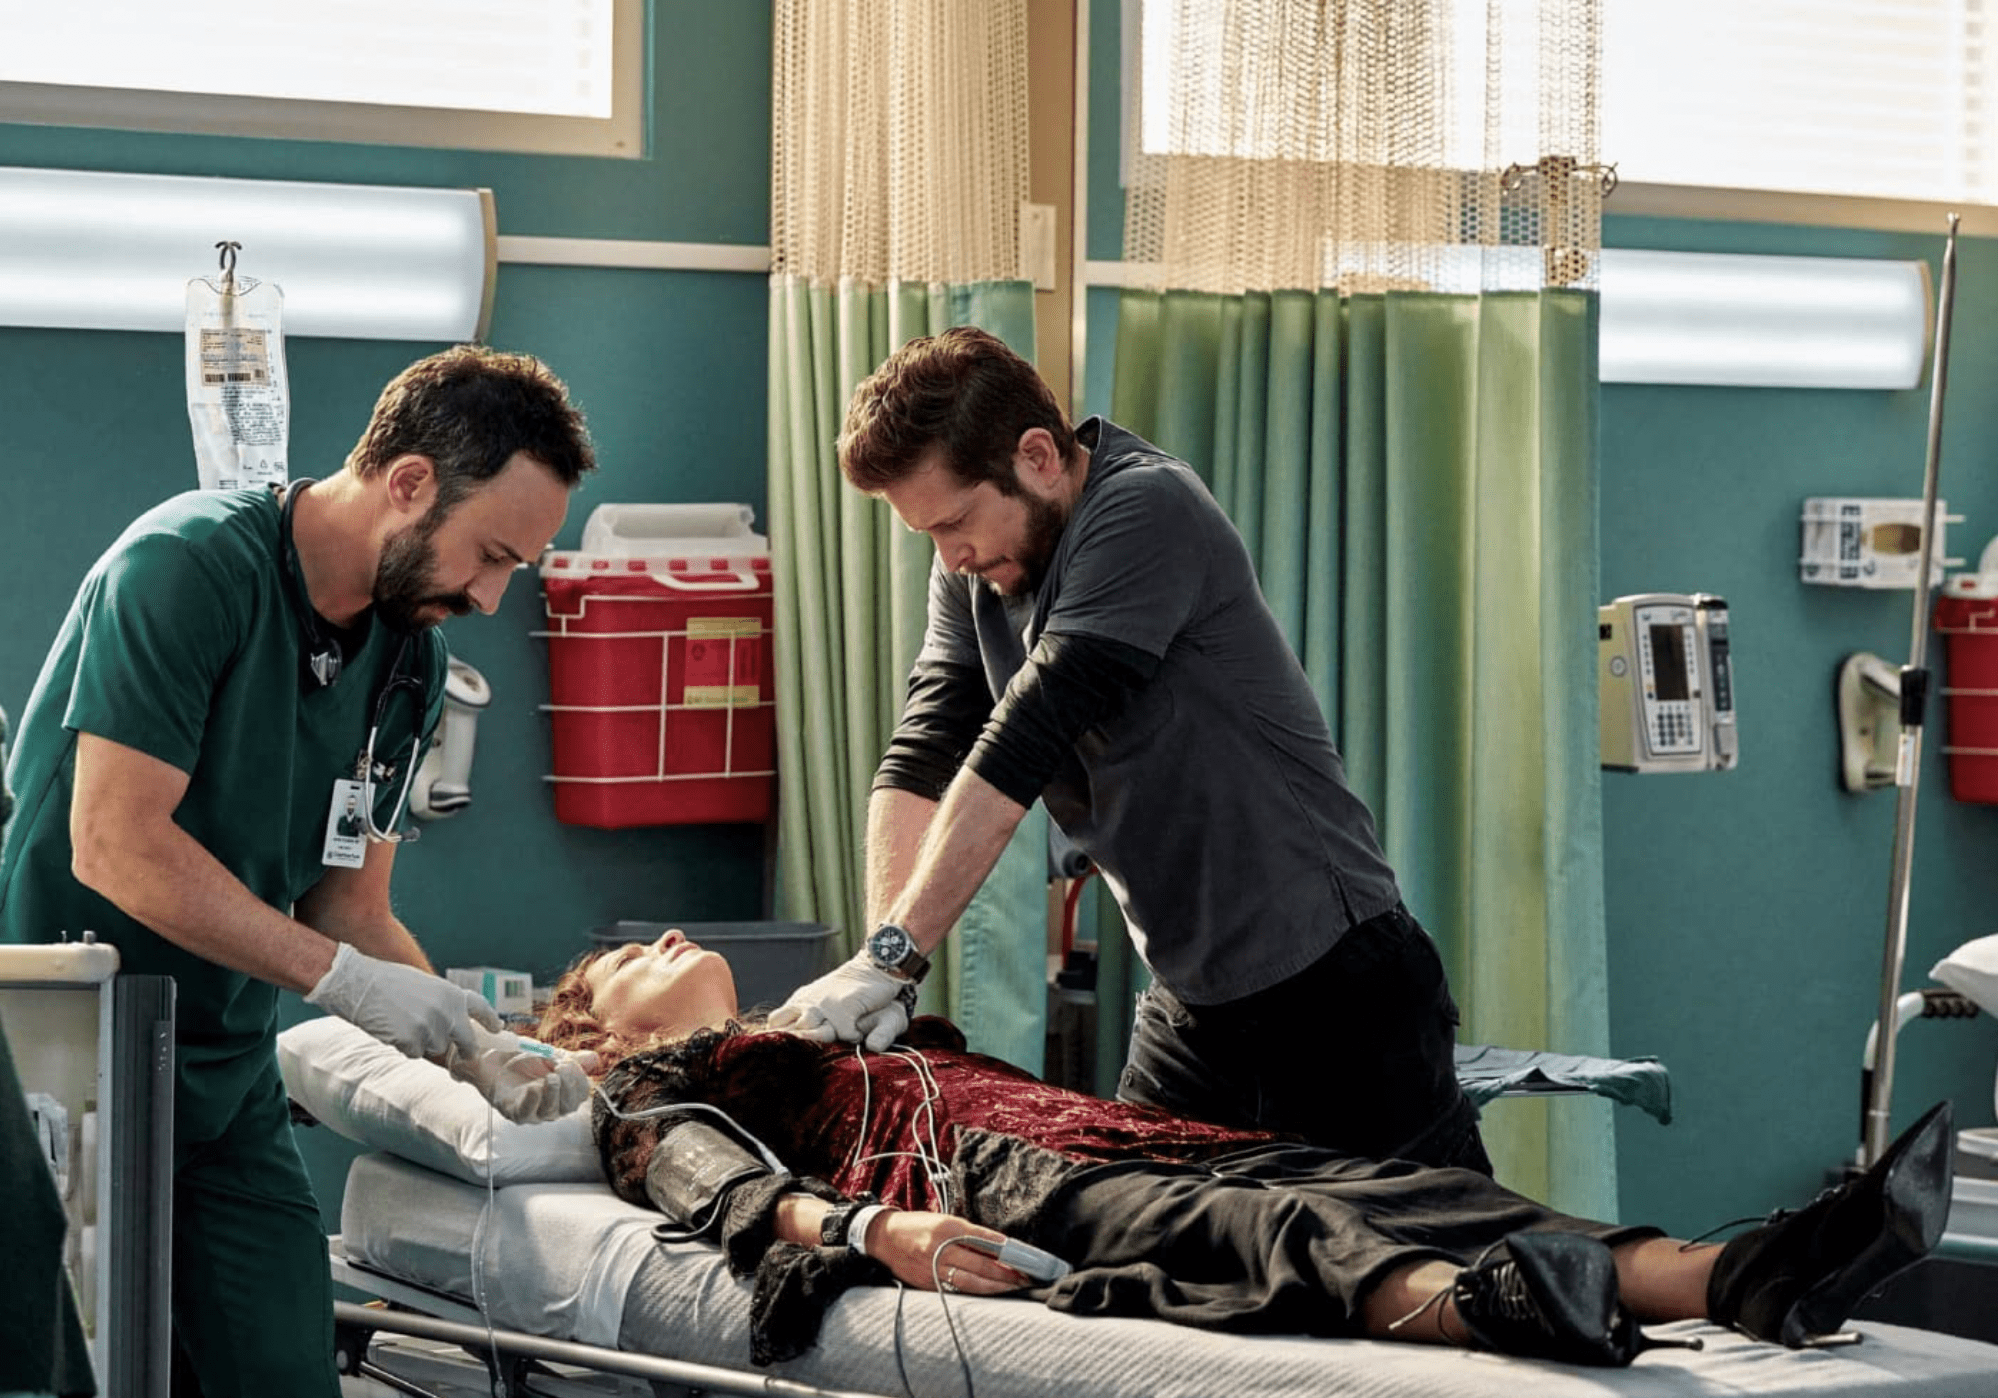 A male nurse and doctor try to save a patient in this image from Hulu